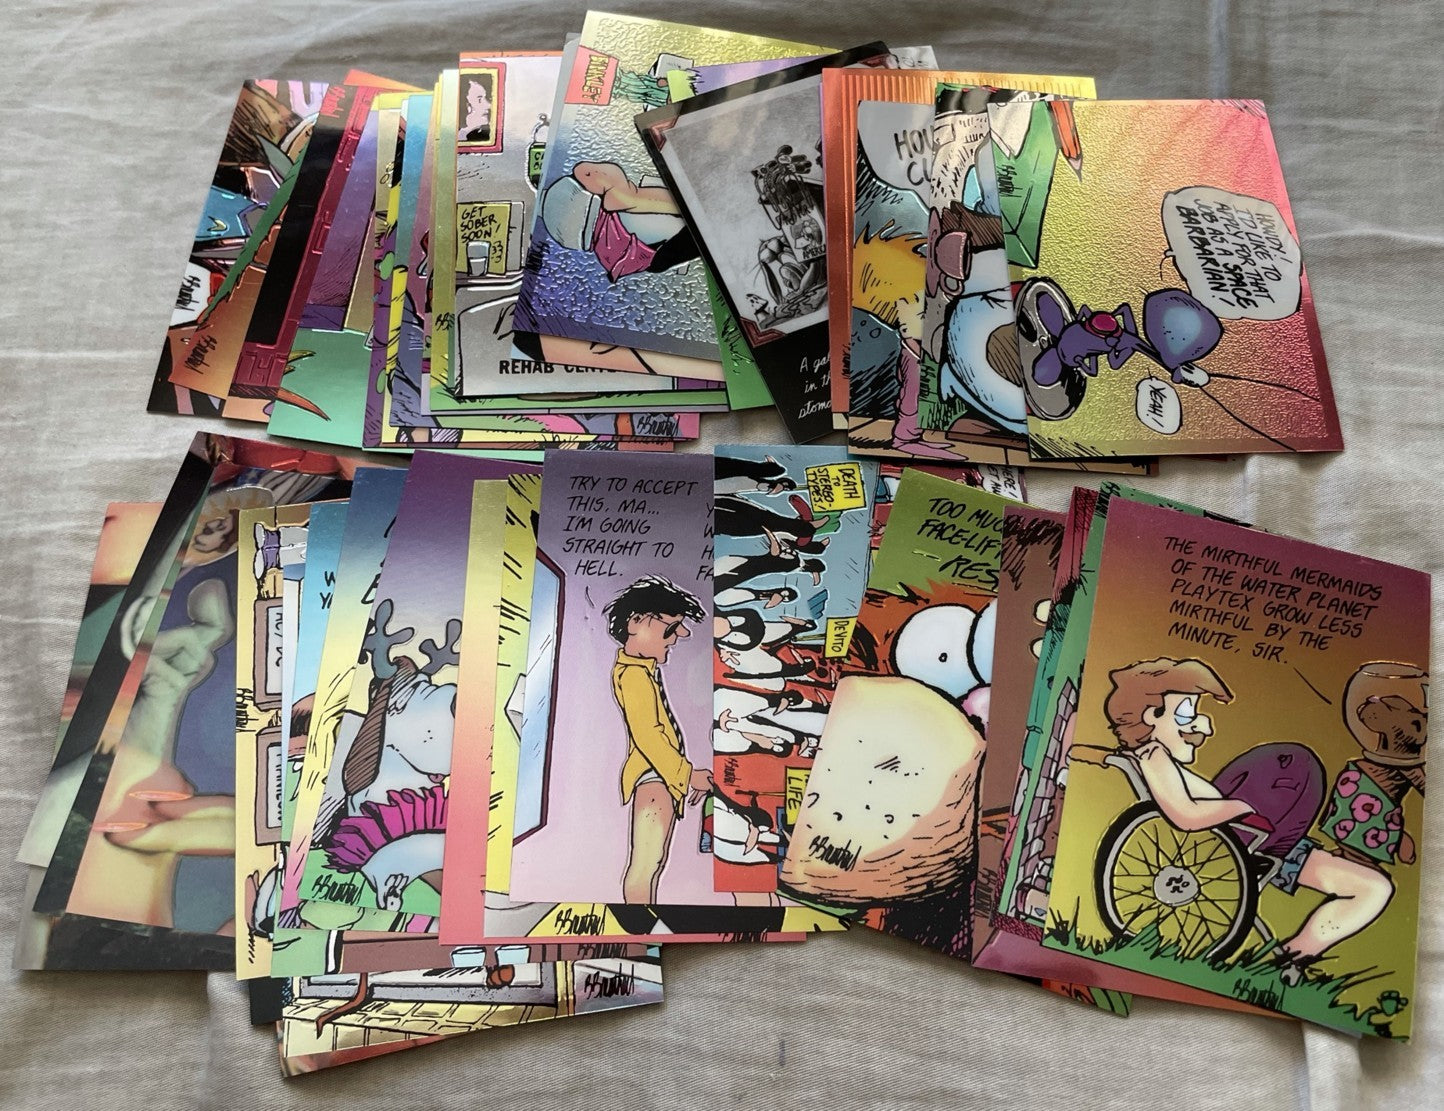 Bloom County Outland 1995 Chromium partial trading card set (42 different) and empty box